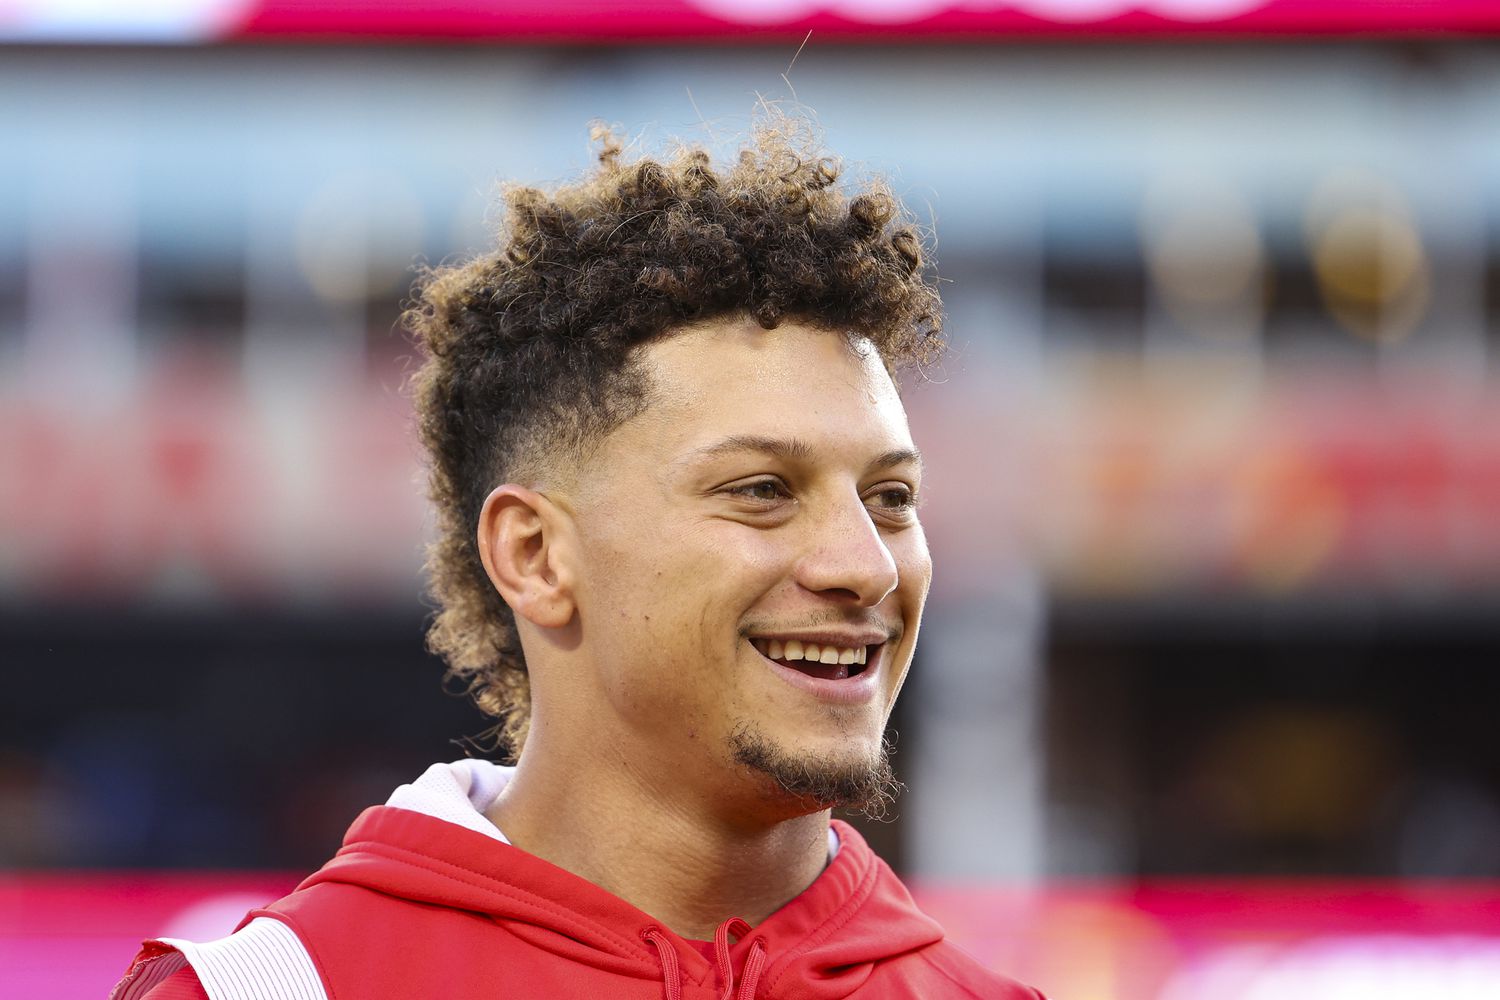 Patrick Mahomes’ High School Signed Baseball Hits Auction, Expected To Fetch Five Figures